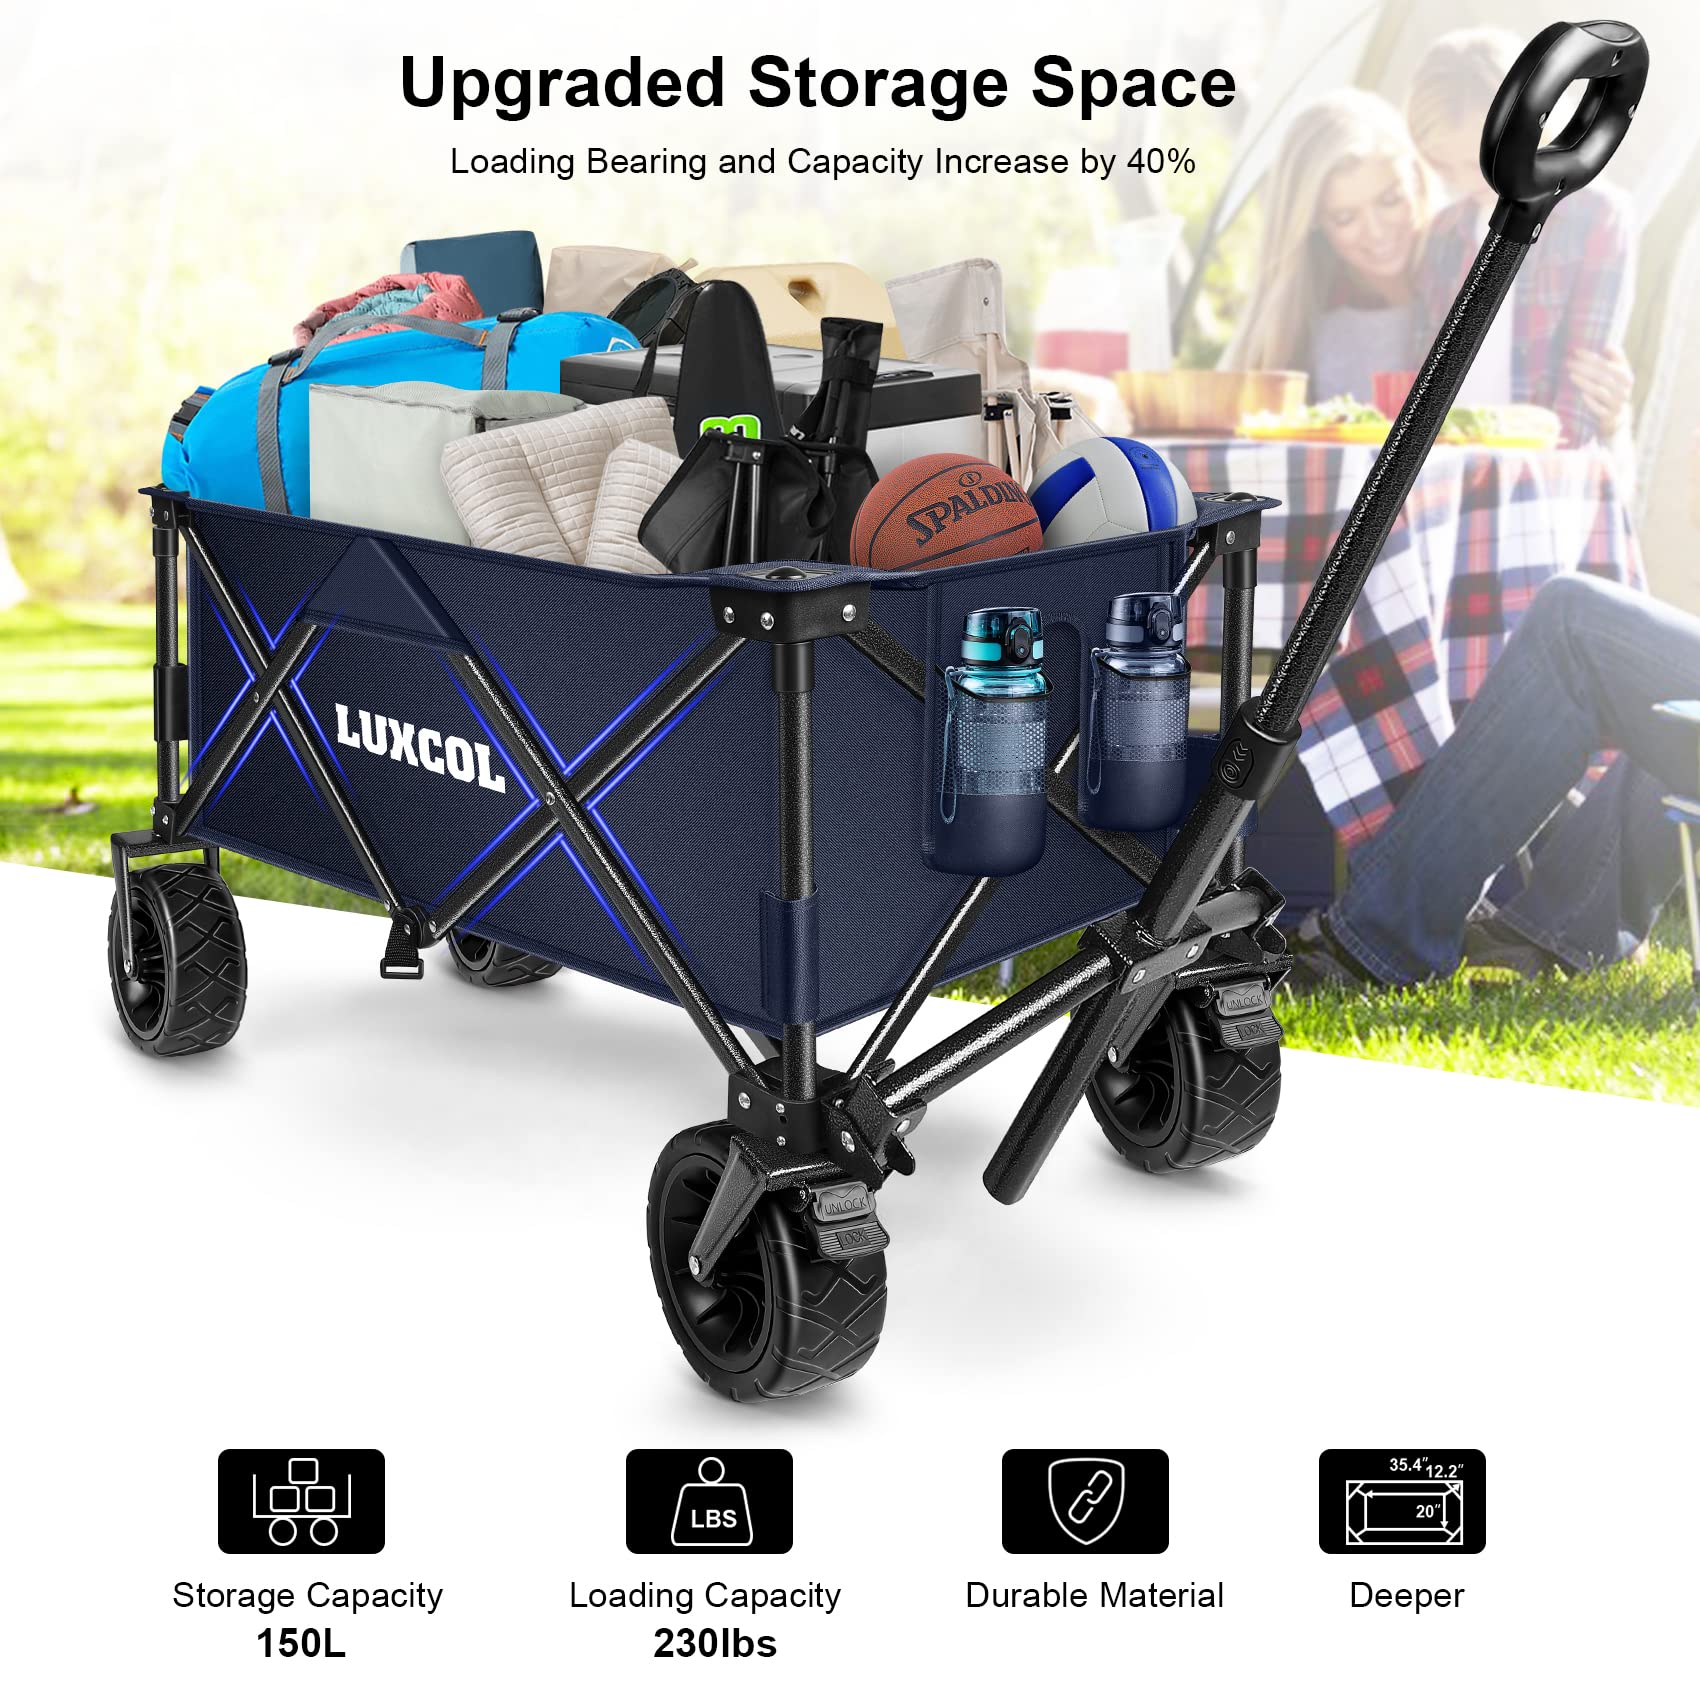 LUXCOL Collapsible Folding Wagon, Heavy Duty Utility Beach Wagon Cart for Sand with Big Wheels, Adjustable Handle&Drink Holders for Shopping, Camping,Garden and Outdoor